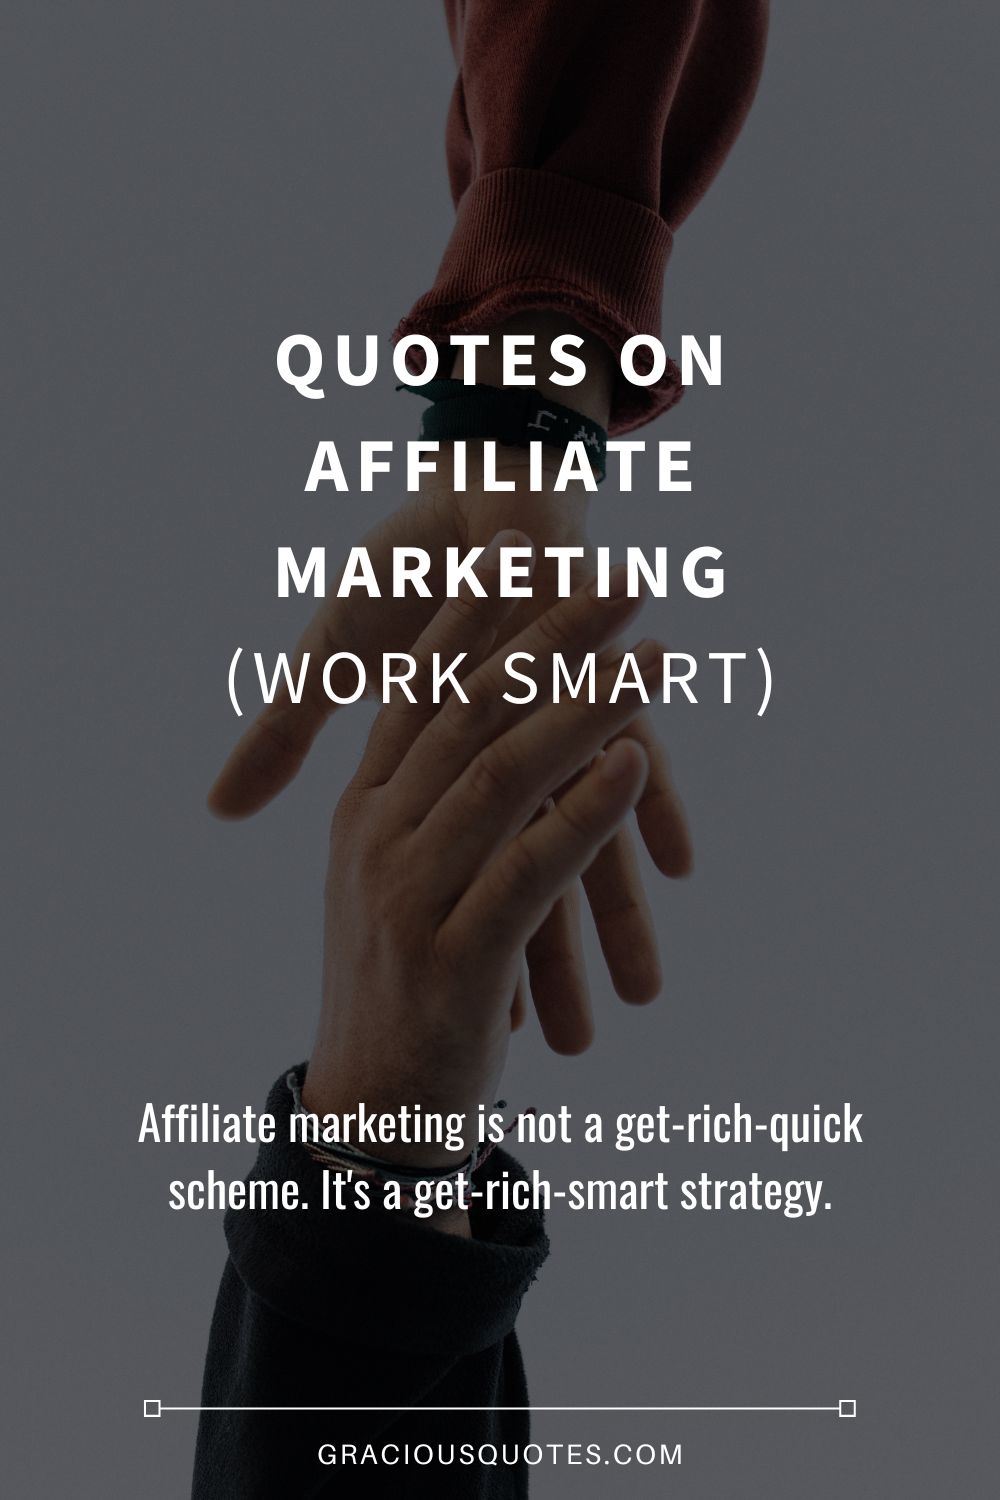 Quotes on Affiliate Marketing (WORK SMART) - Gracious Quotes